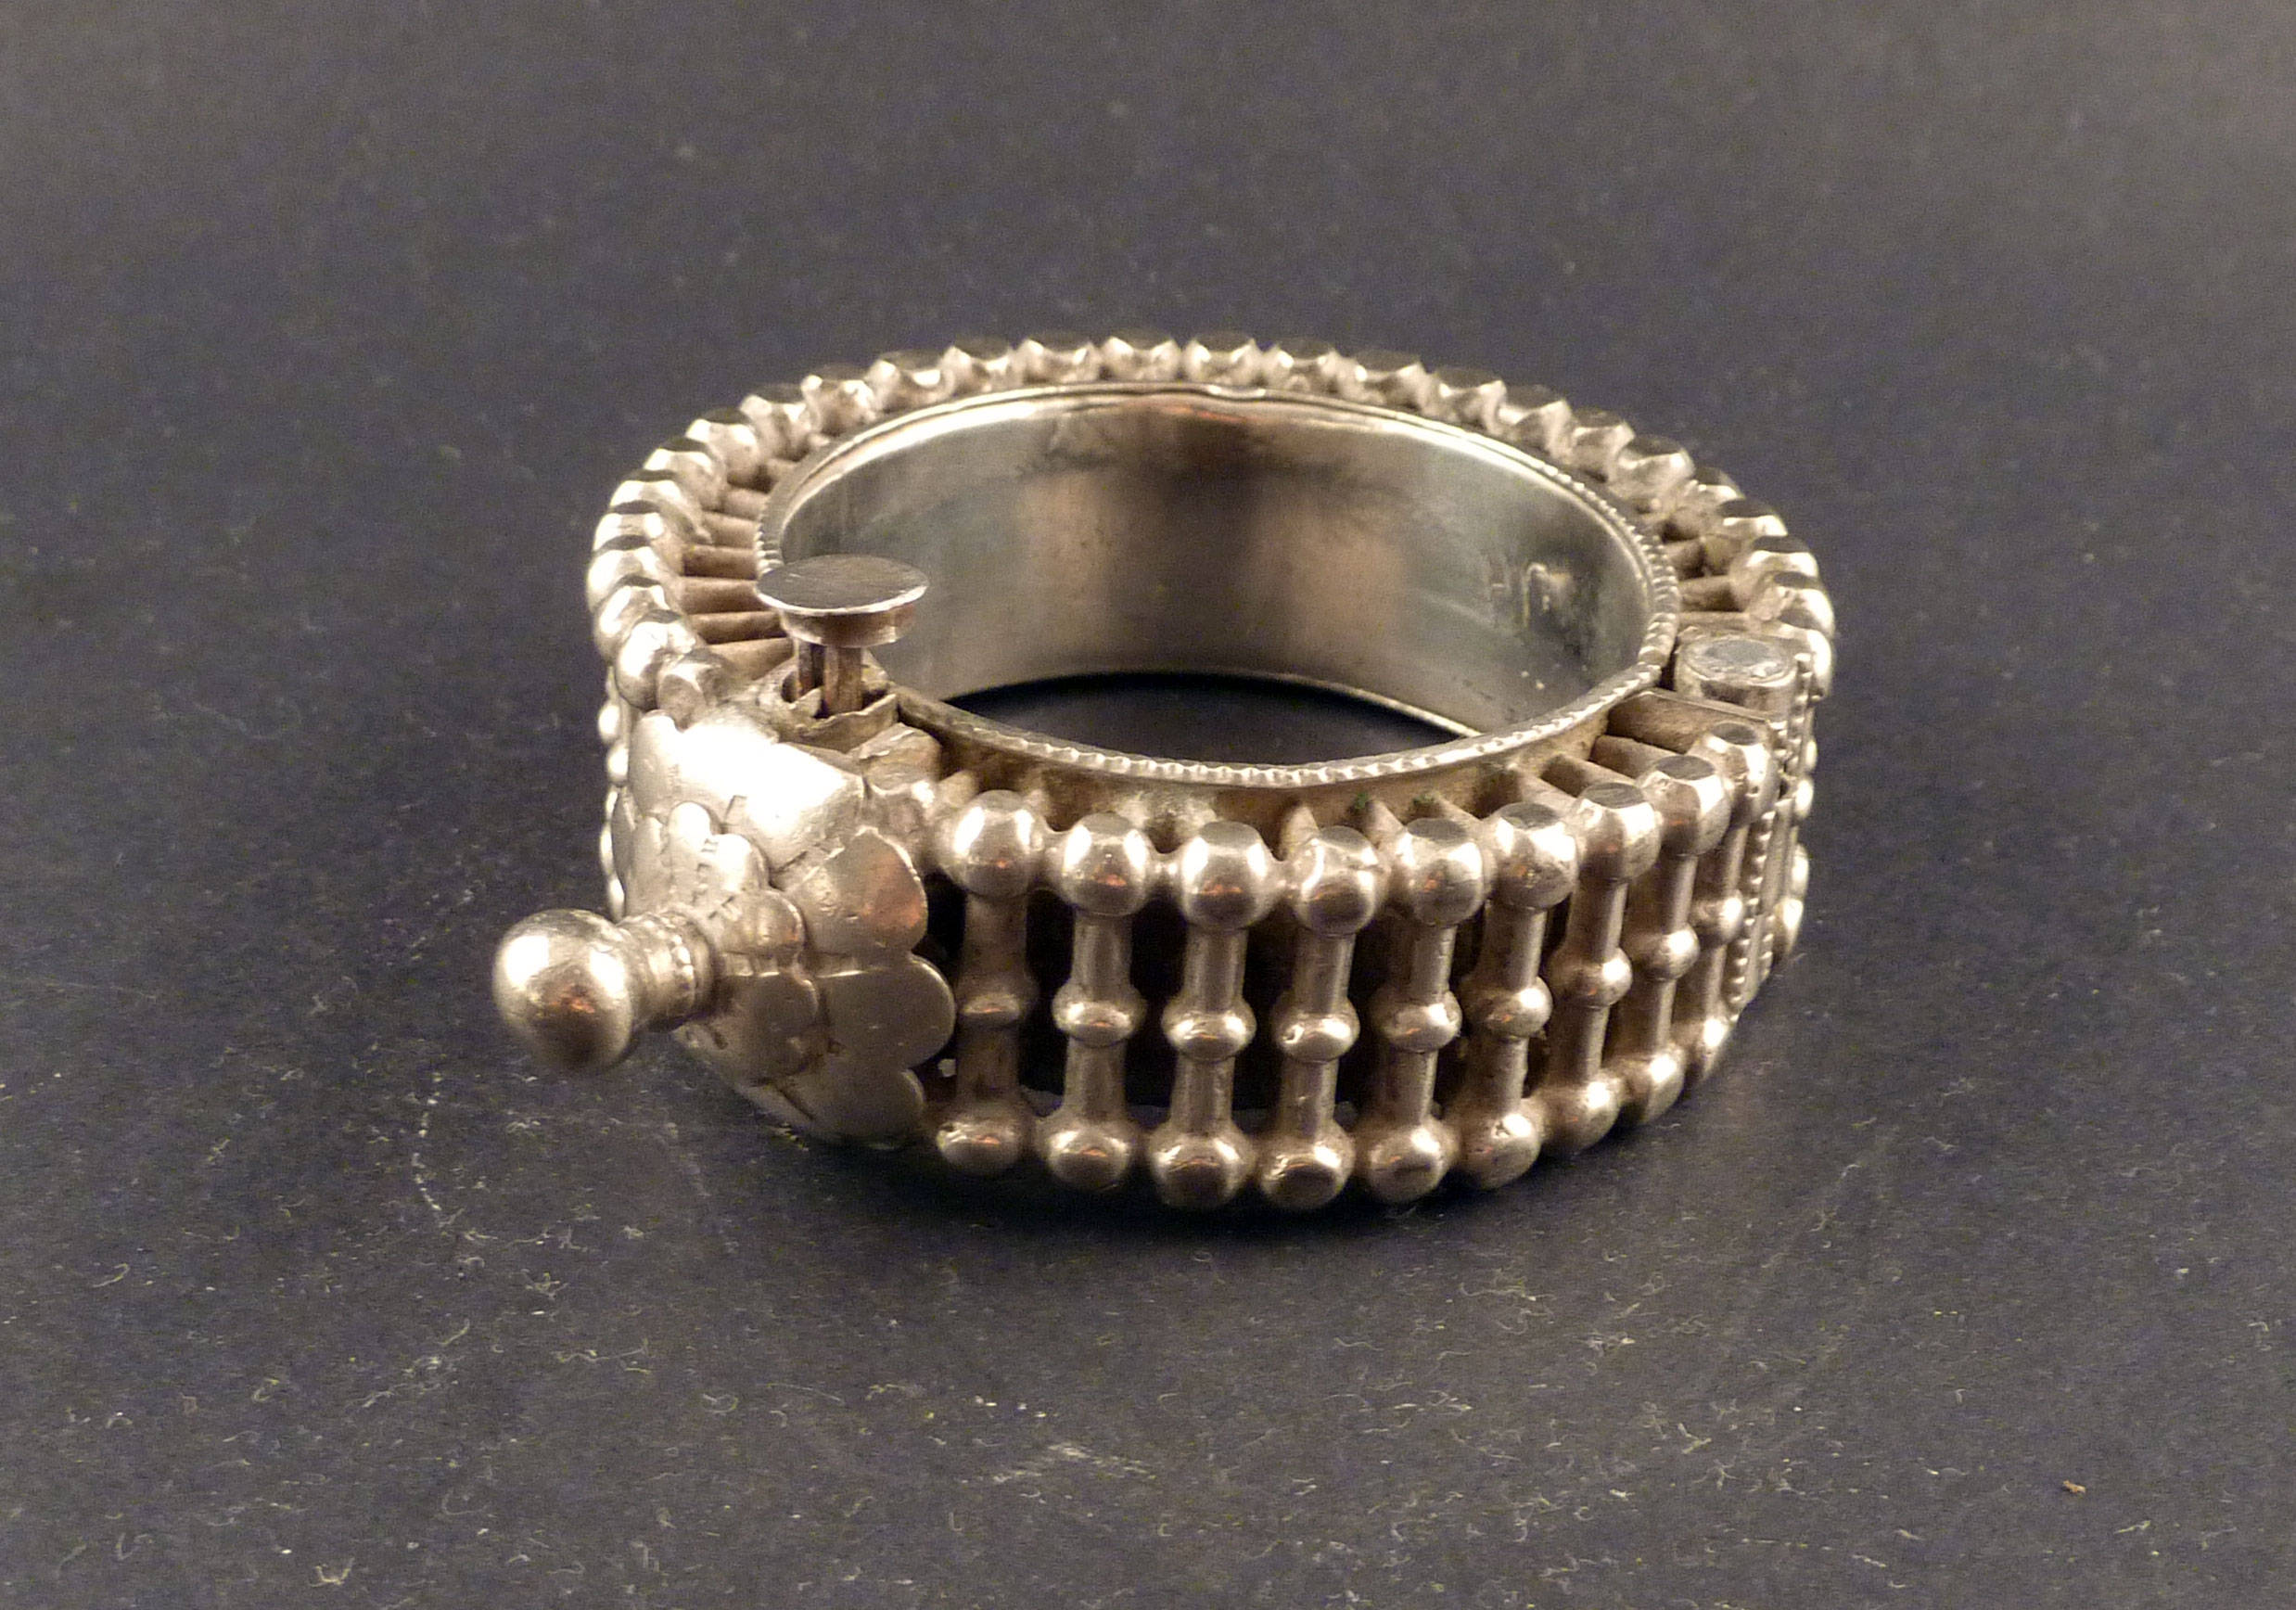 RARE HEAVY THICK VINTAGE SILVER BRACELET FROM INDIA PREOWNED | eBay